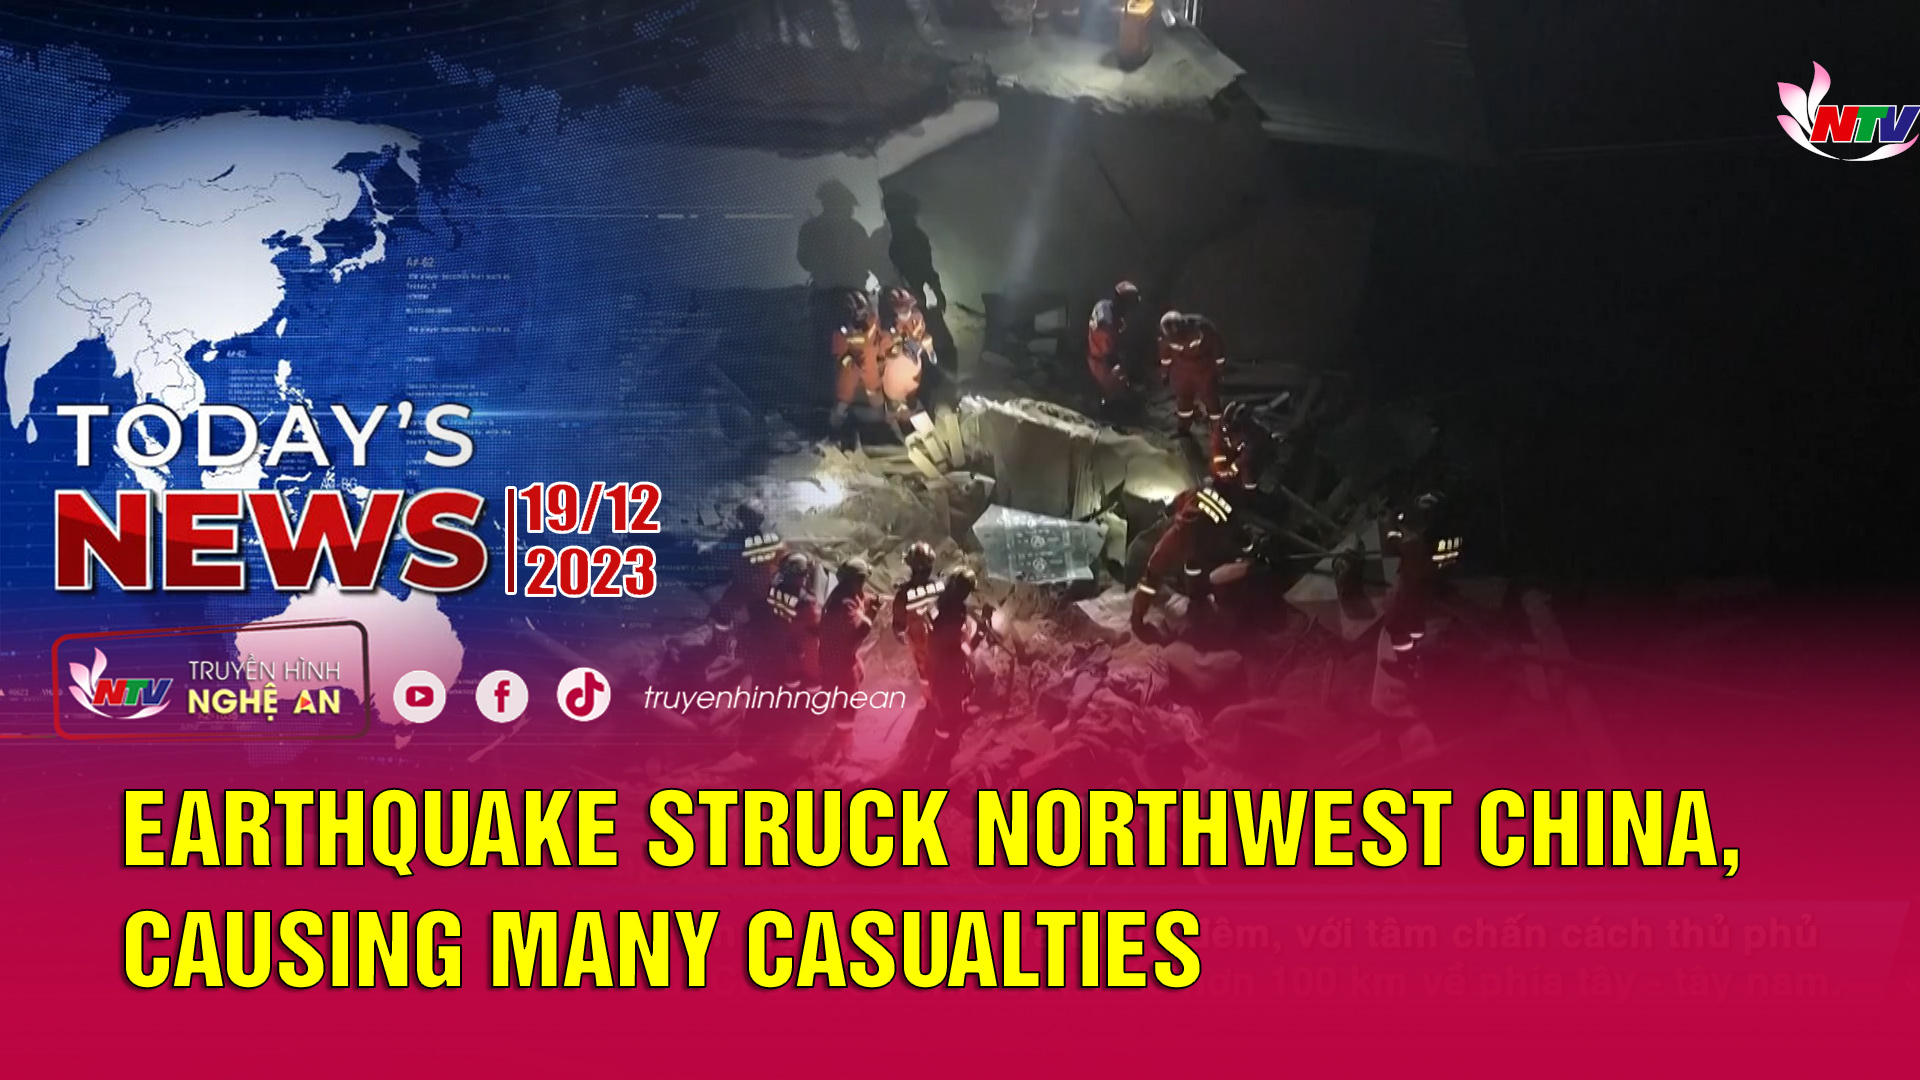 Today's News - 19/12/2023: Earthquake struck northwest China, causing many casualties